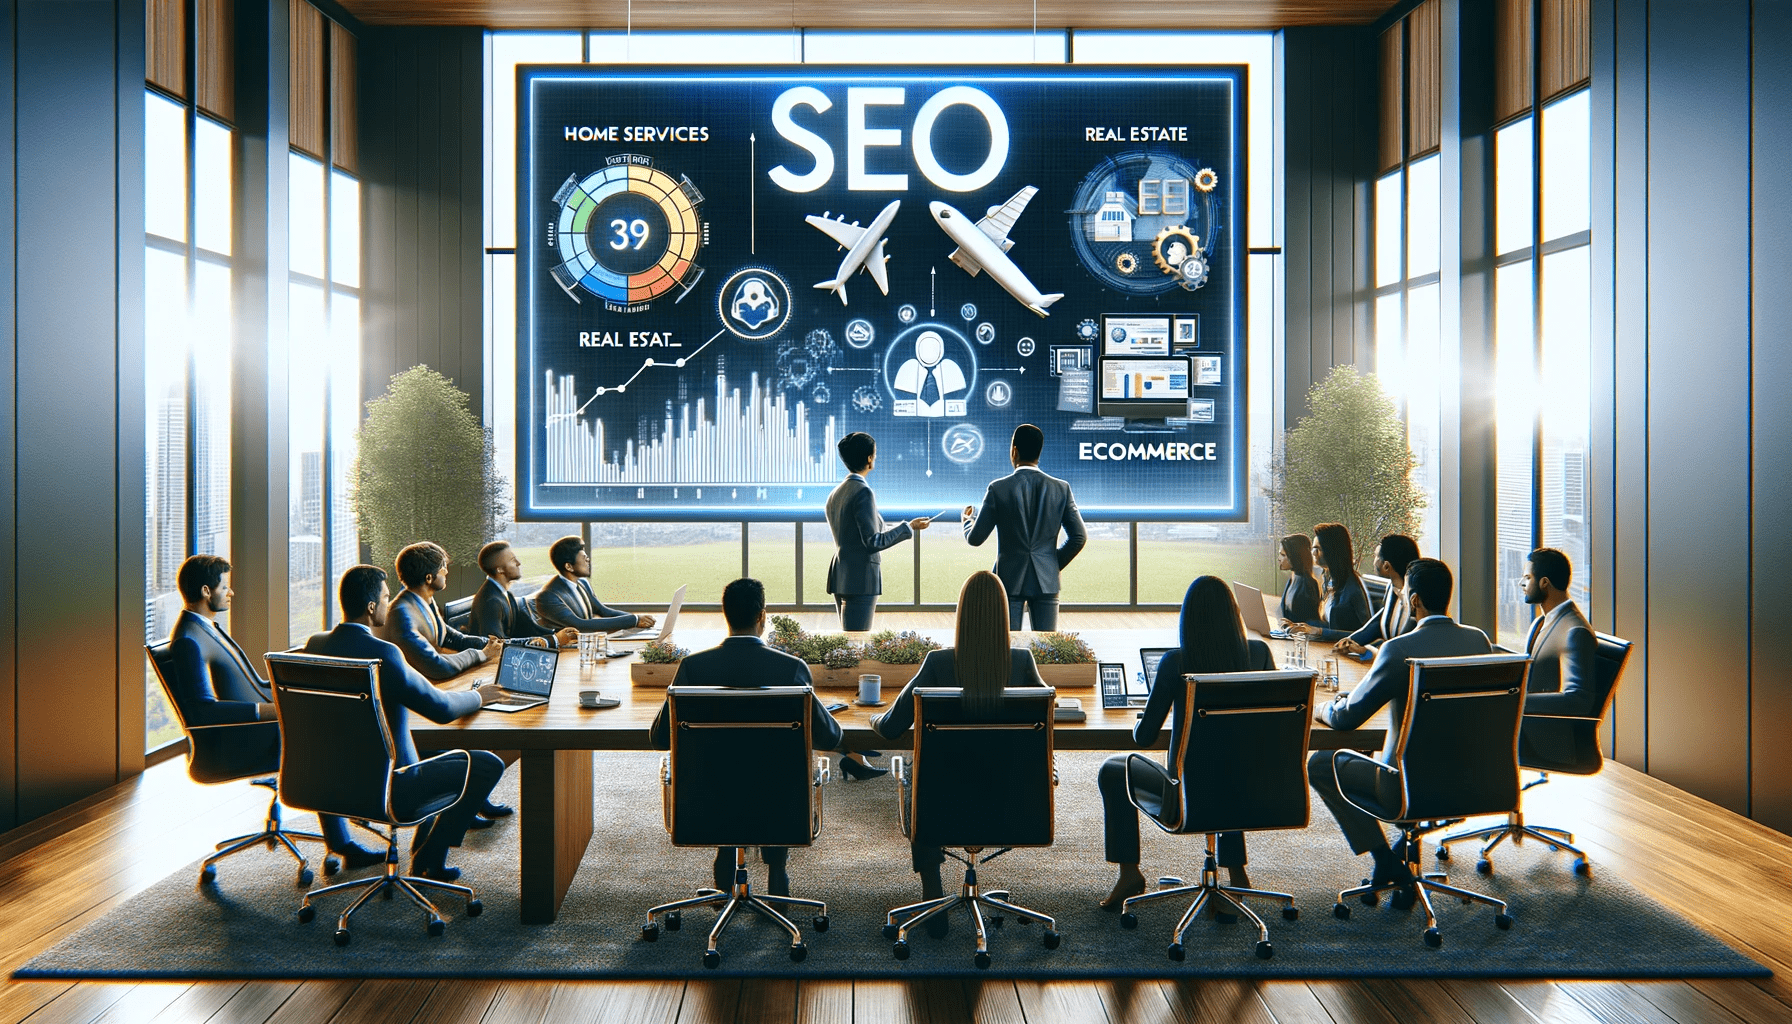 consultor seo,what is a consultor seo